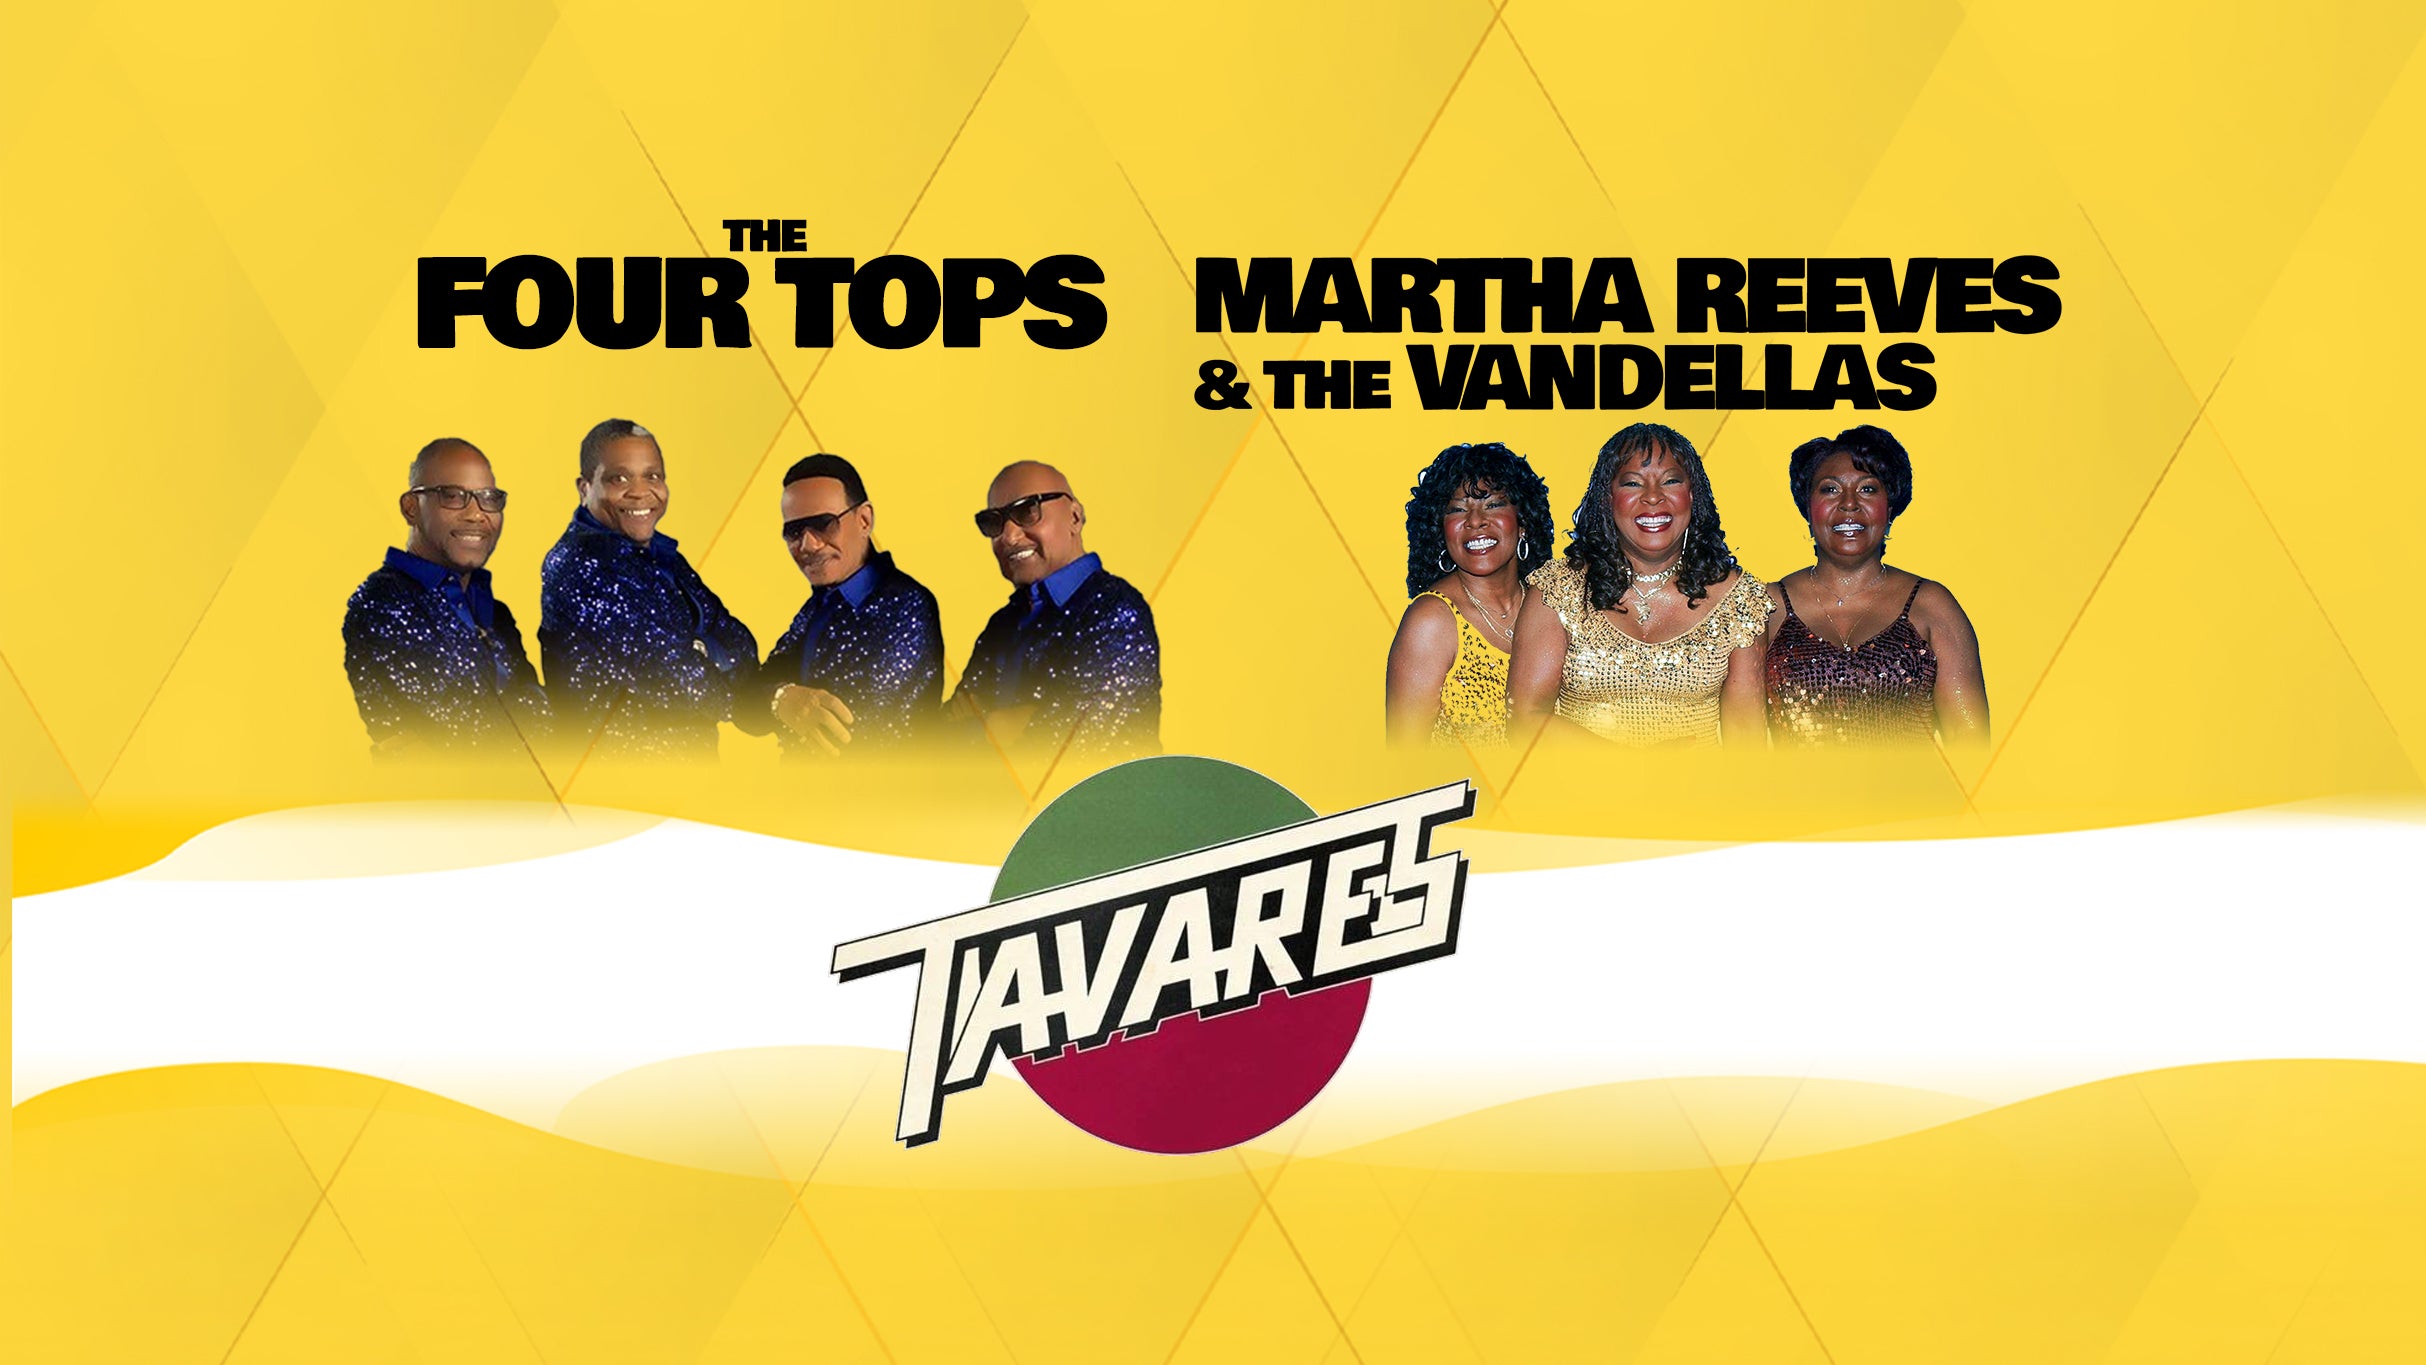 The Four Tops/ Tavares /Martha Reeves & the Vandellas in Hull promo photo for Ticketmaster presale offer code